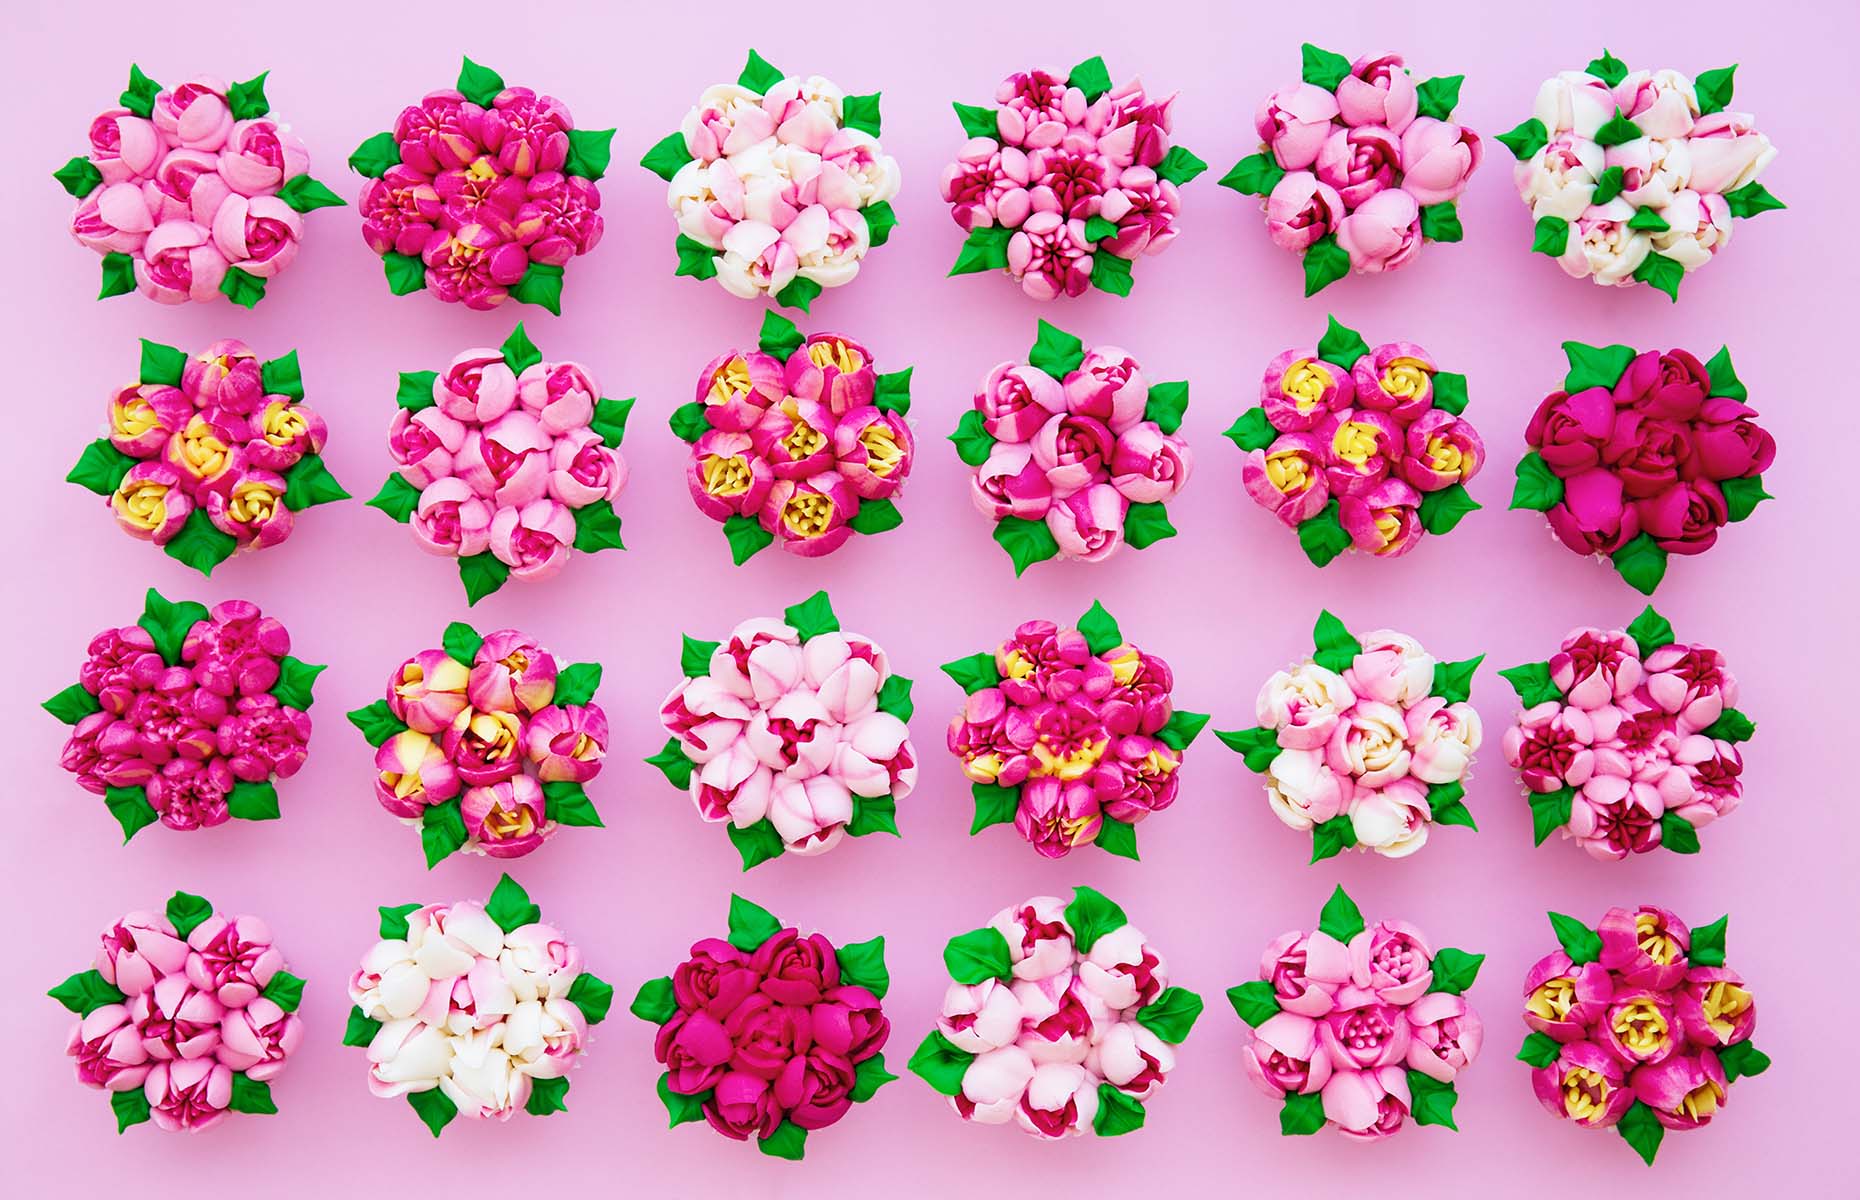 Piped flower cupcakes (Image: Ruth Black/Shutterstock)